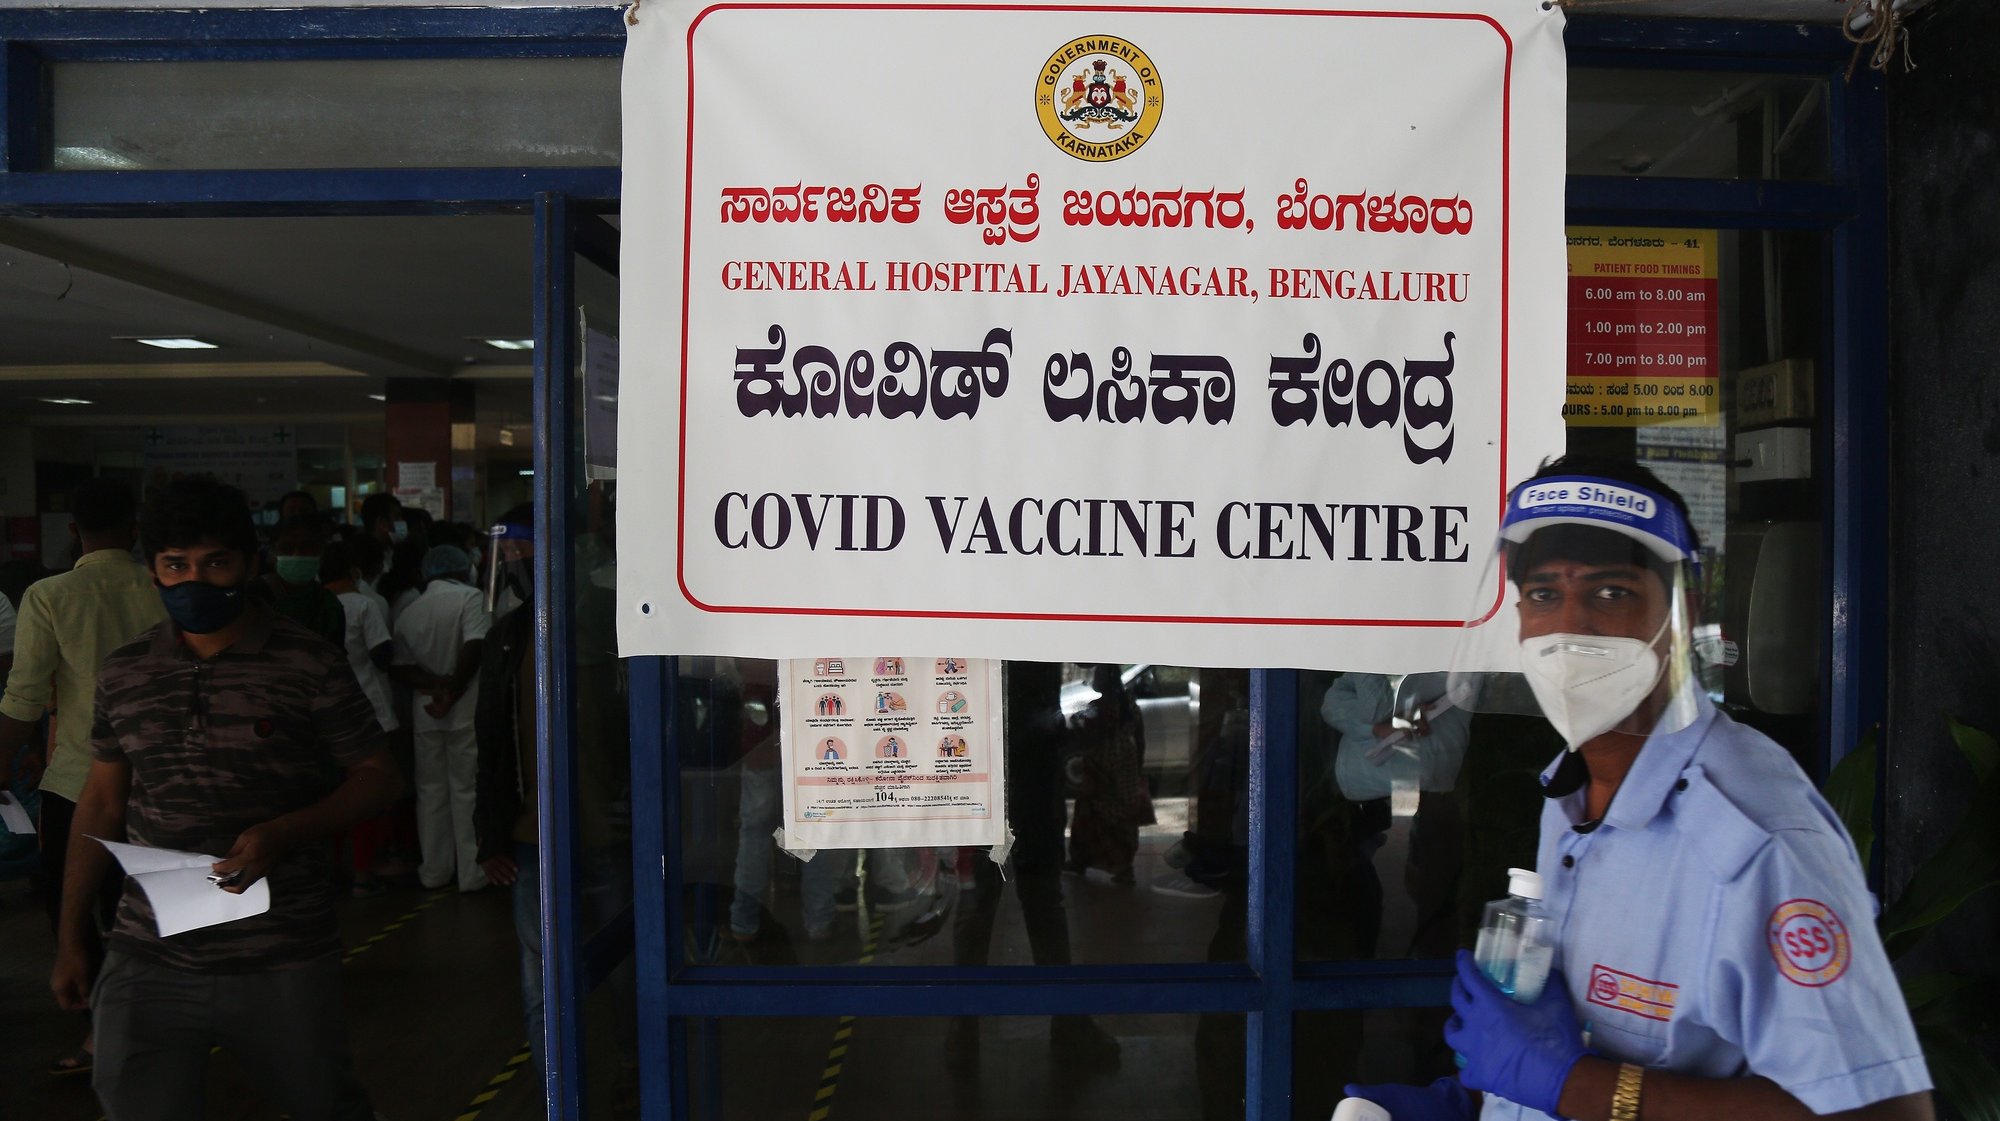 epa08941074 A general view of the COVID-19 vaccine center at Government General Hospital in Jayanagar in Bangalore, India, 16 January 2021. One of the world&#039;s biggest and nationwide COVID-19 vaccination drive was launched by Indian prime minister Narendra Modi and aimed at inoculating 30 million people in first drive that include front line workers like Accredited Social Health Activist (ASHA) doctors, MBBS students, nurses etc.  EPA/JAGADEESH NV